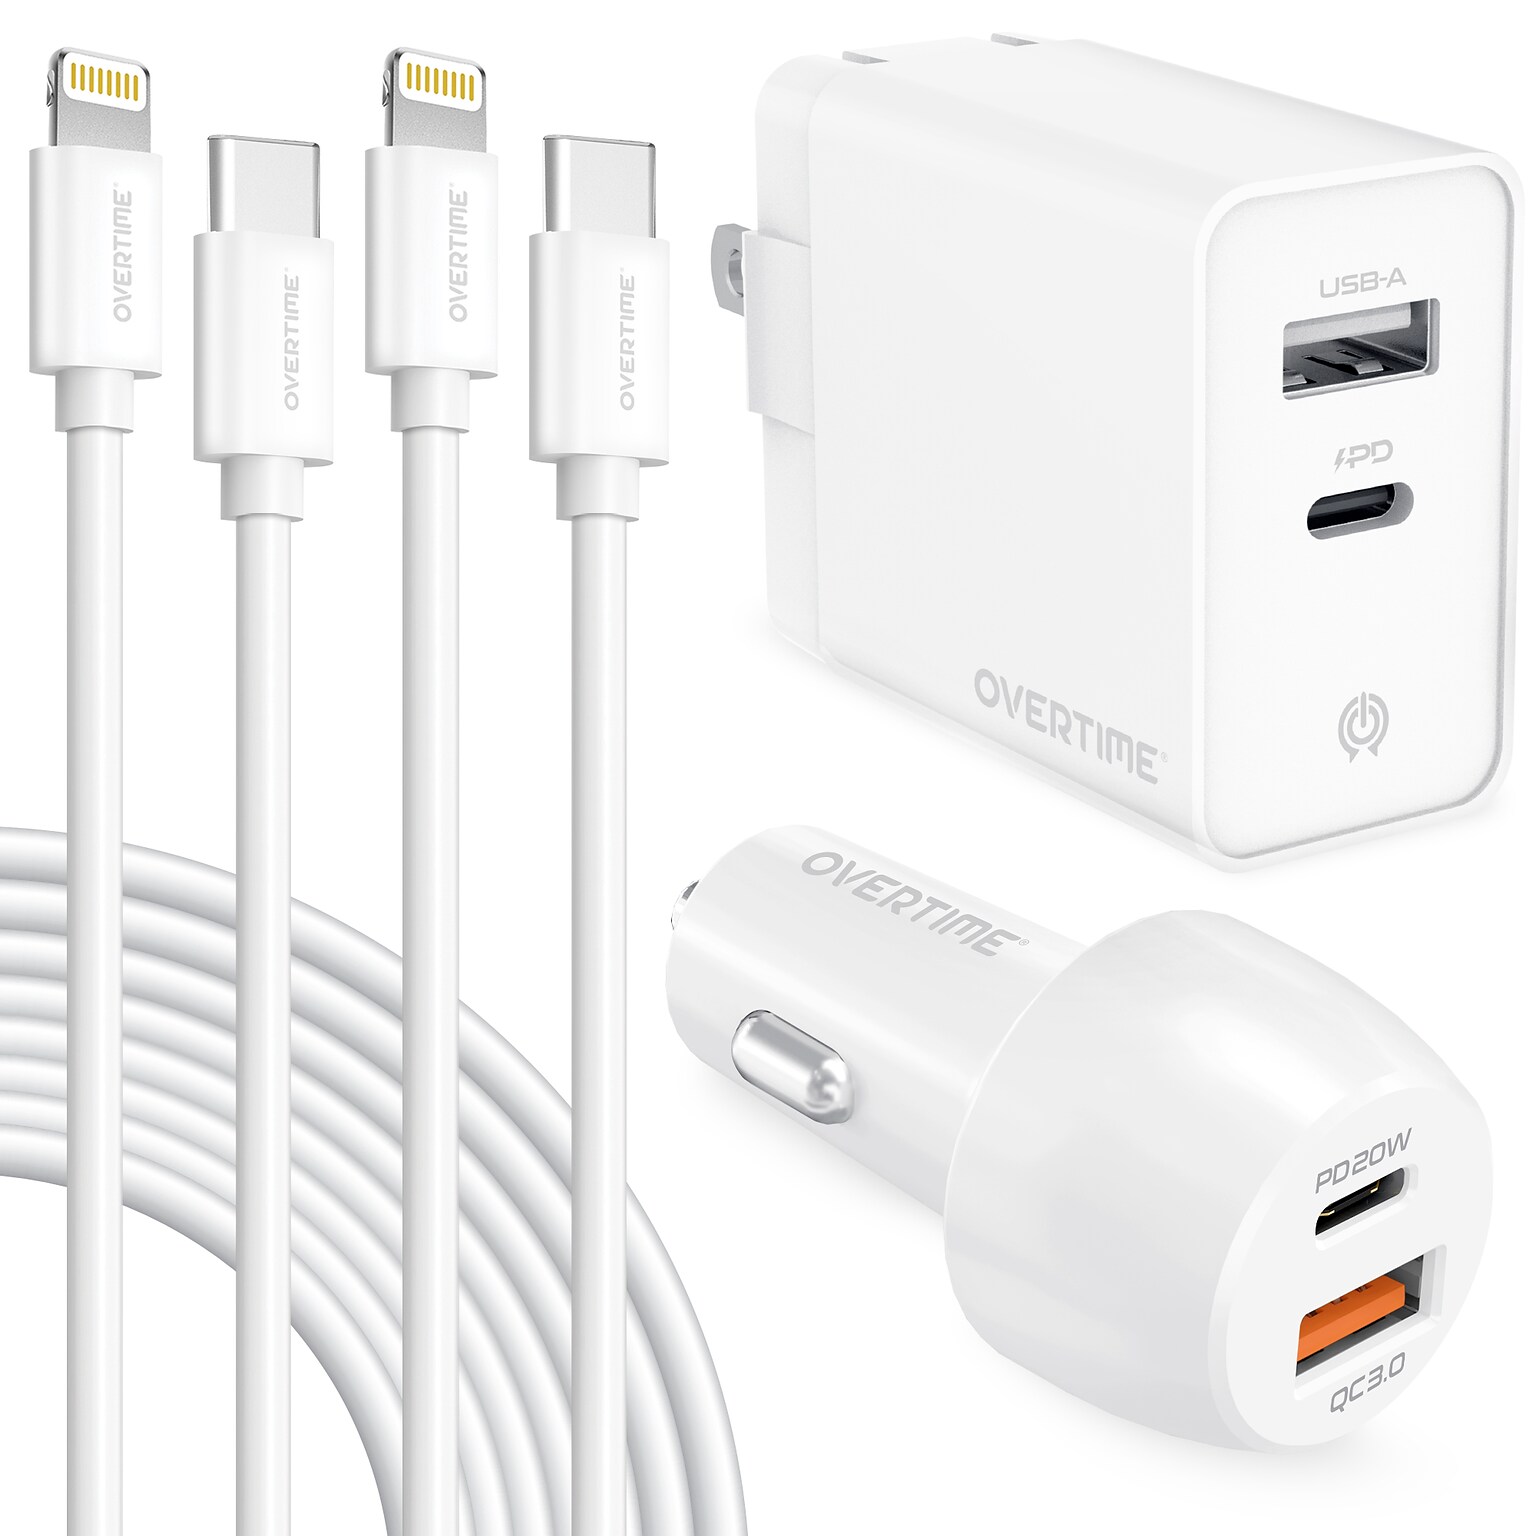 Delton Overtime USB-C/USB Wall & Car Chargers with Two Apple MFi Certified Cables for iPhone/iPad, White (CE14550A)